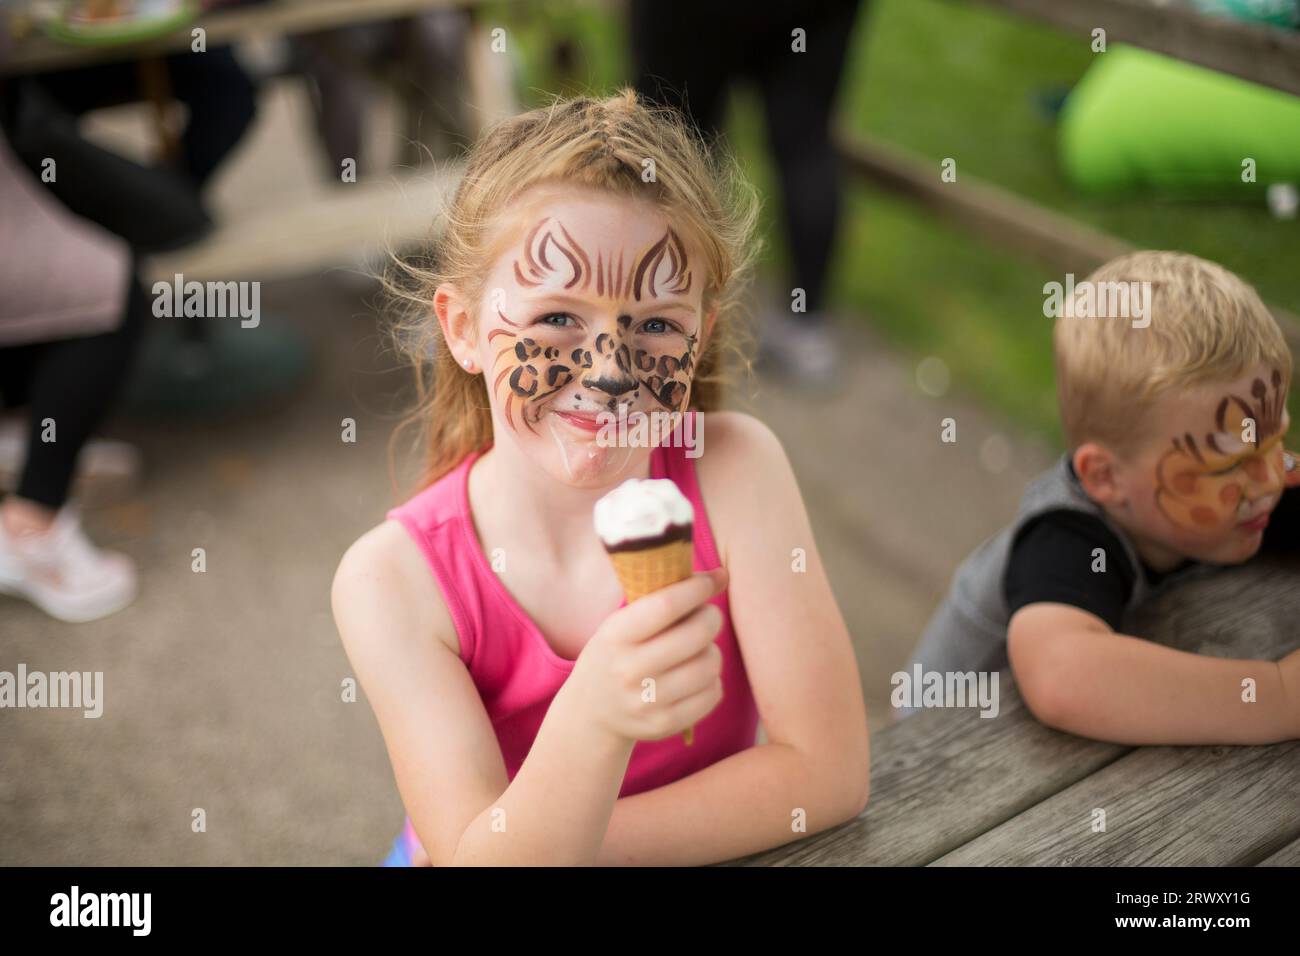 Young girl with a leopard face paint eating ice cream and smiling. Stock Photo